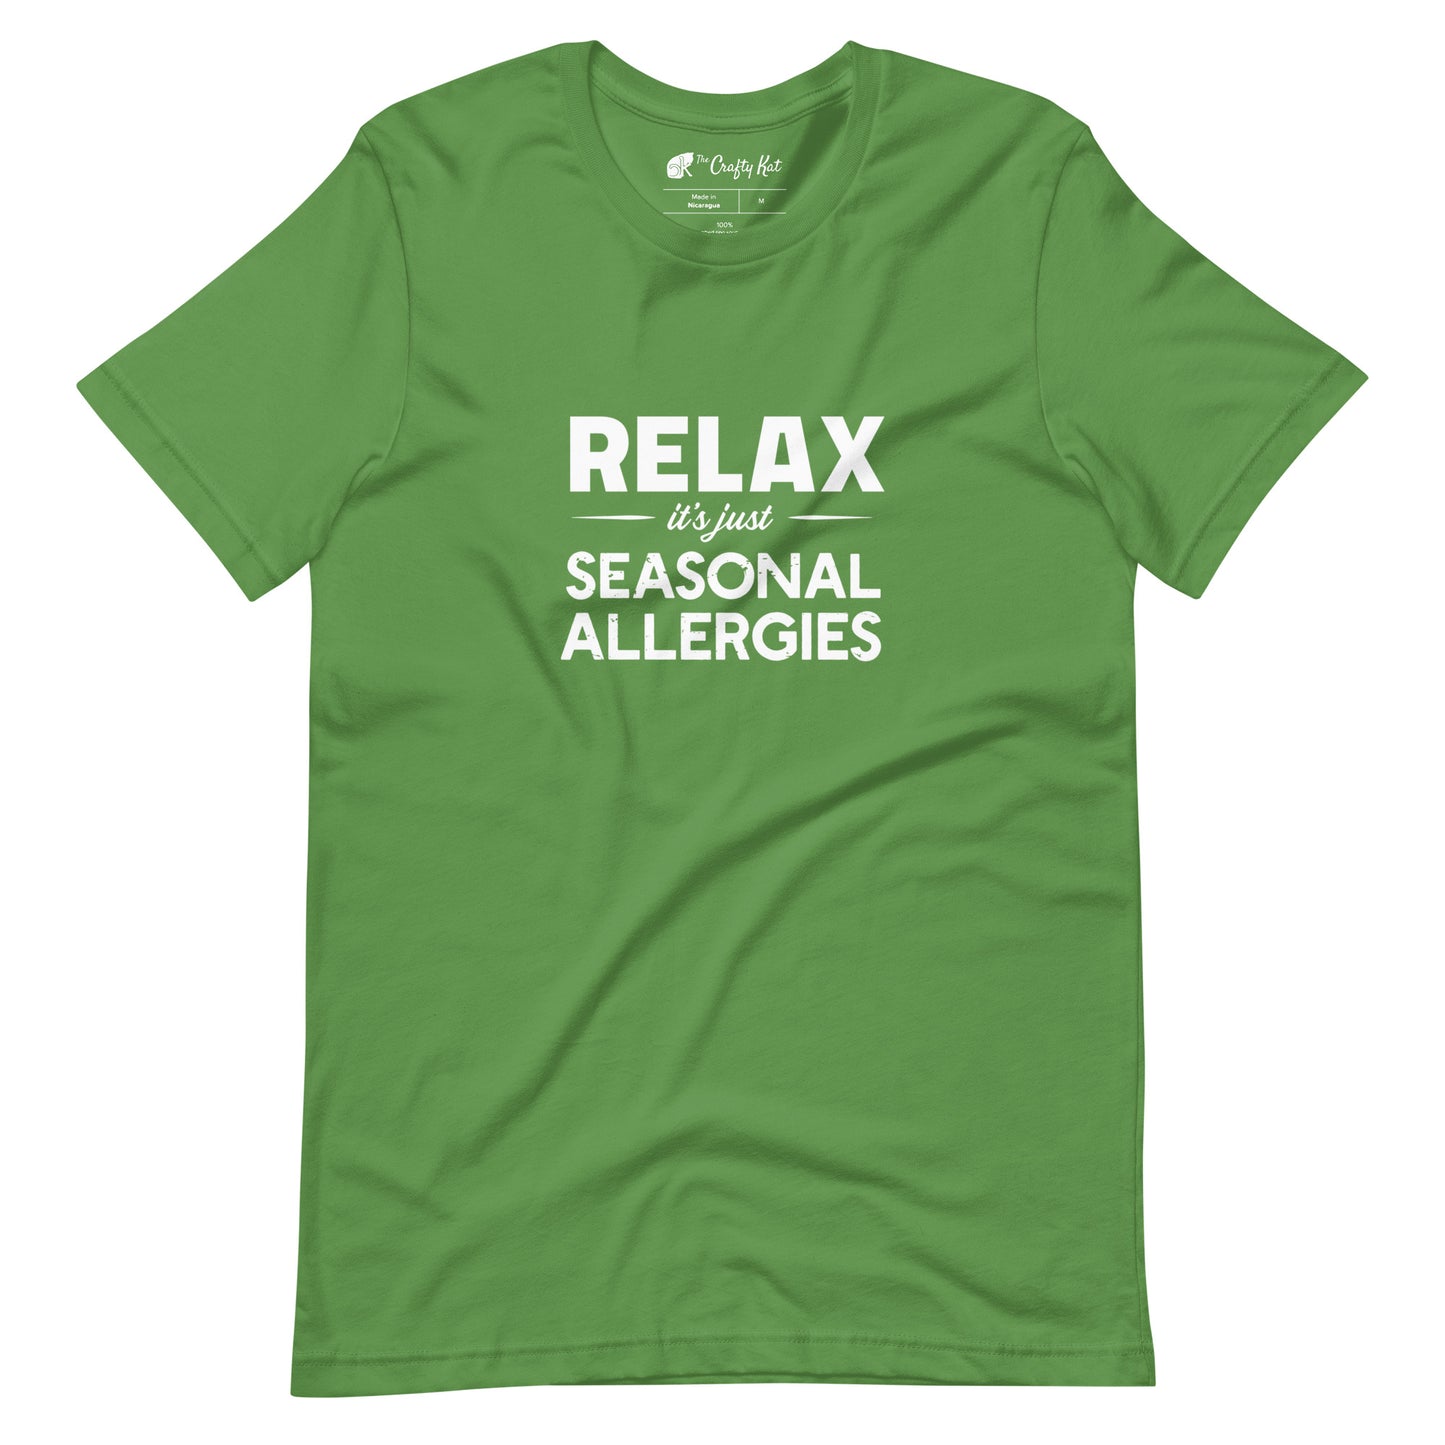 Leaf green t-shirt with white graphic: "RELAX it's just SEASONAL ALLERGIES"